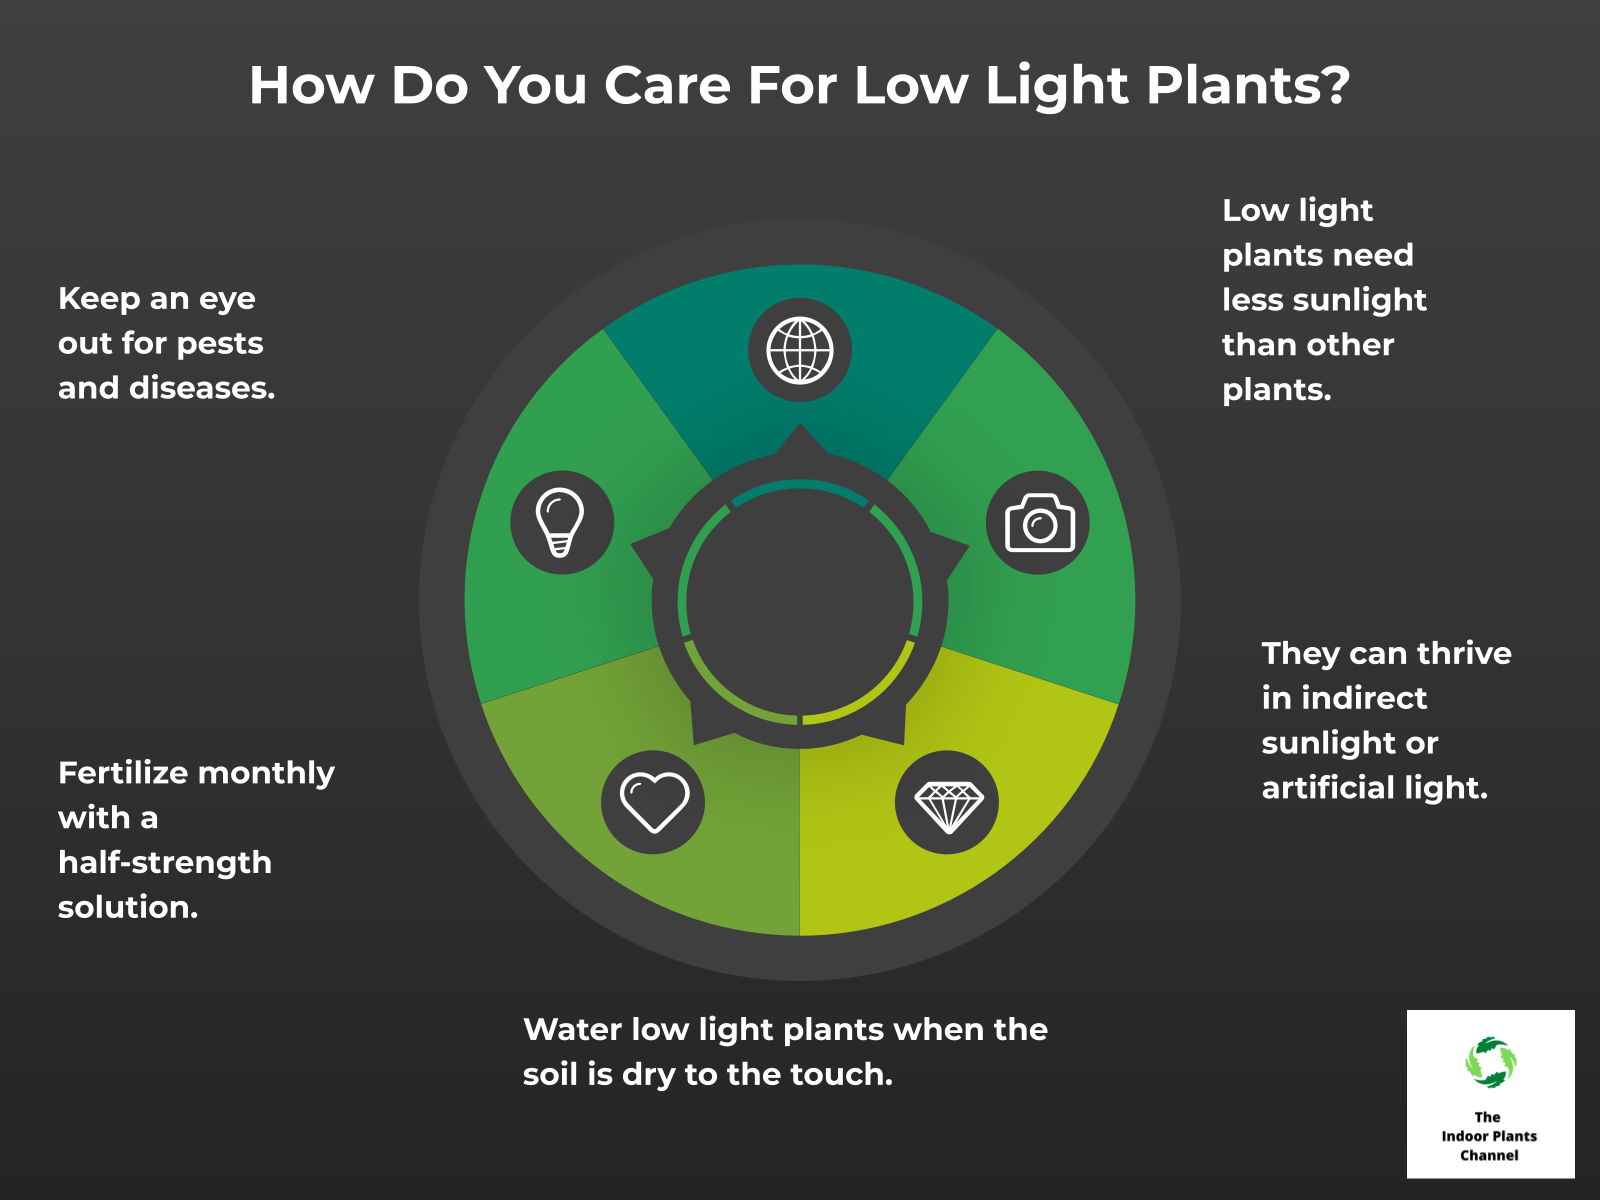 7 Answers To The Most Frequently Asked Questions About Low Light Plants